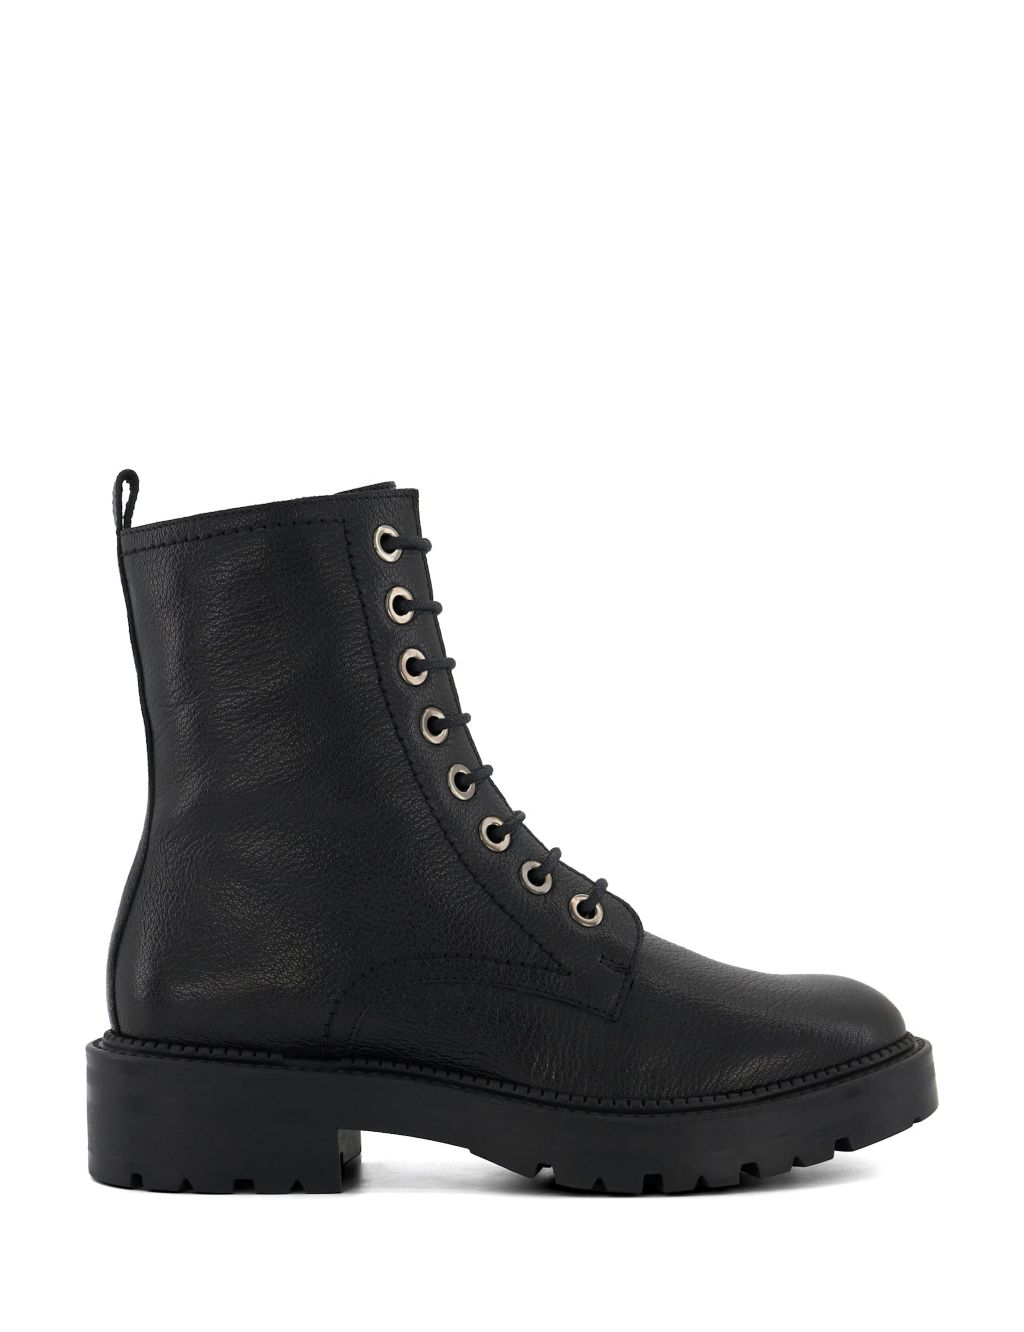 Leather Lace Up Block Heel Ankle Boots 1 of 1